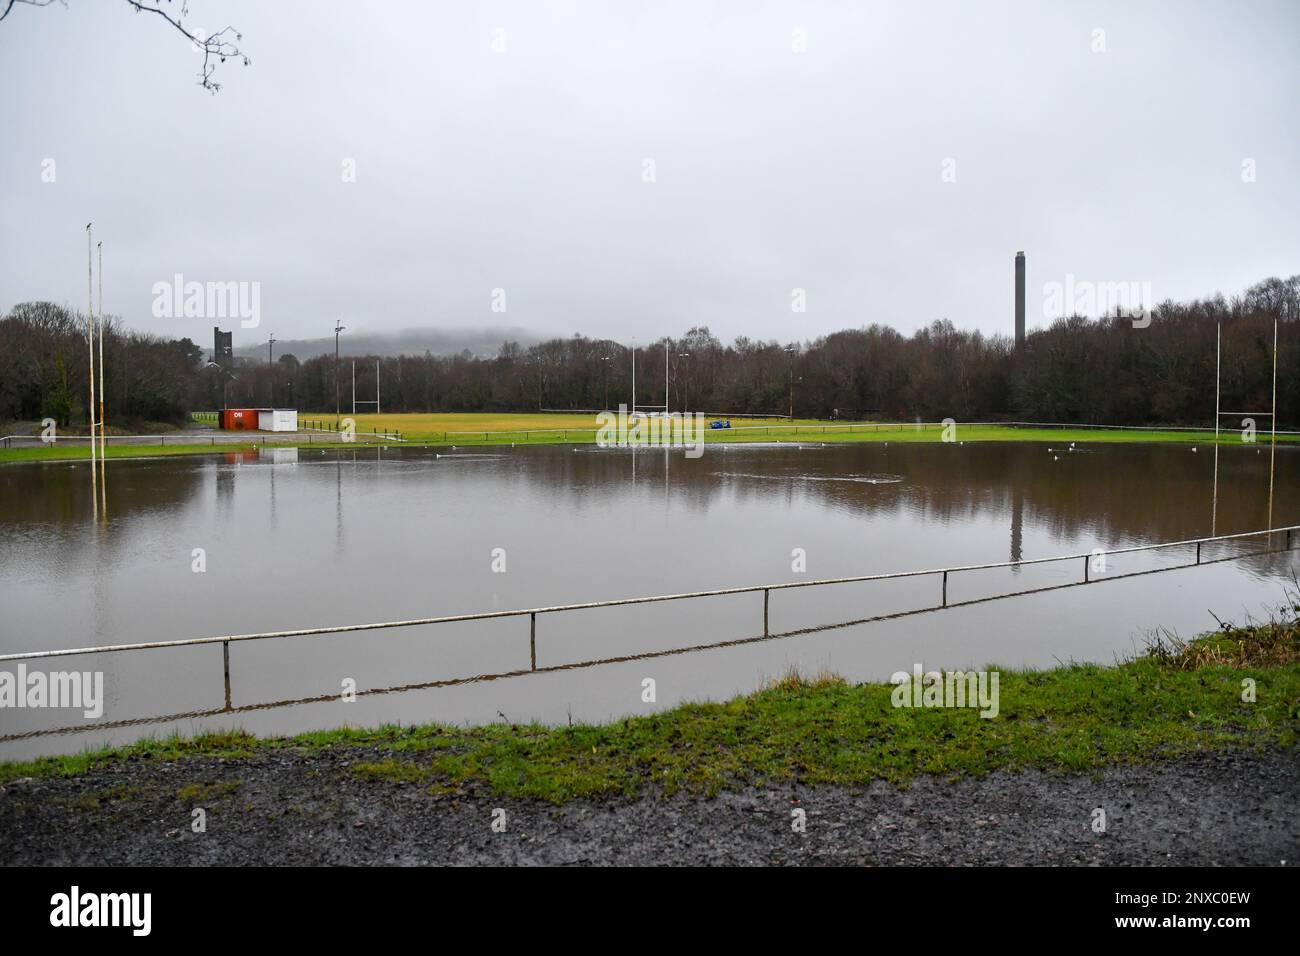 Swansea, Wales. 20 January 2021. The Vardre RFC rugby pitch at Maes y Bioden was flooded after Storm Christoph brought heavy rainfall to the Swansea valley in Wales, UK on 20 January 2021. Credit: Duncan Thomas/Majestic Media/Alamy Live News. Stock Photo